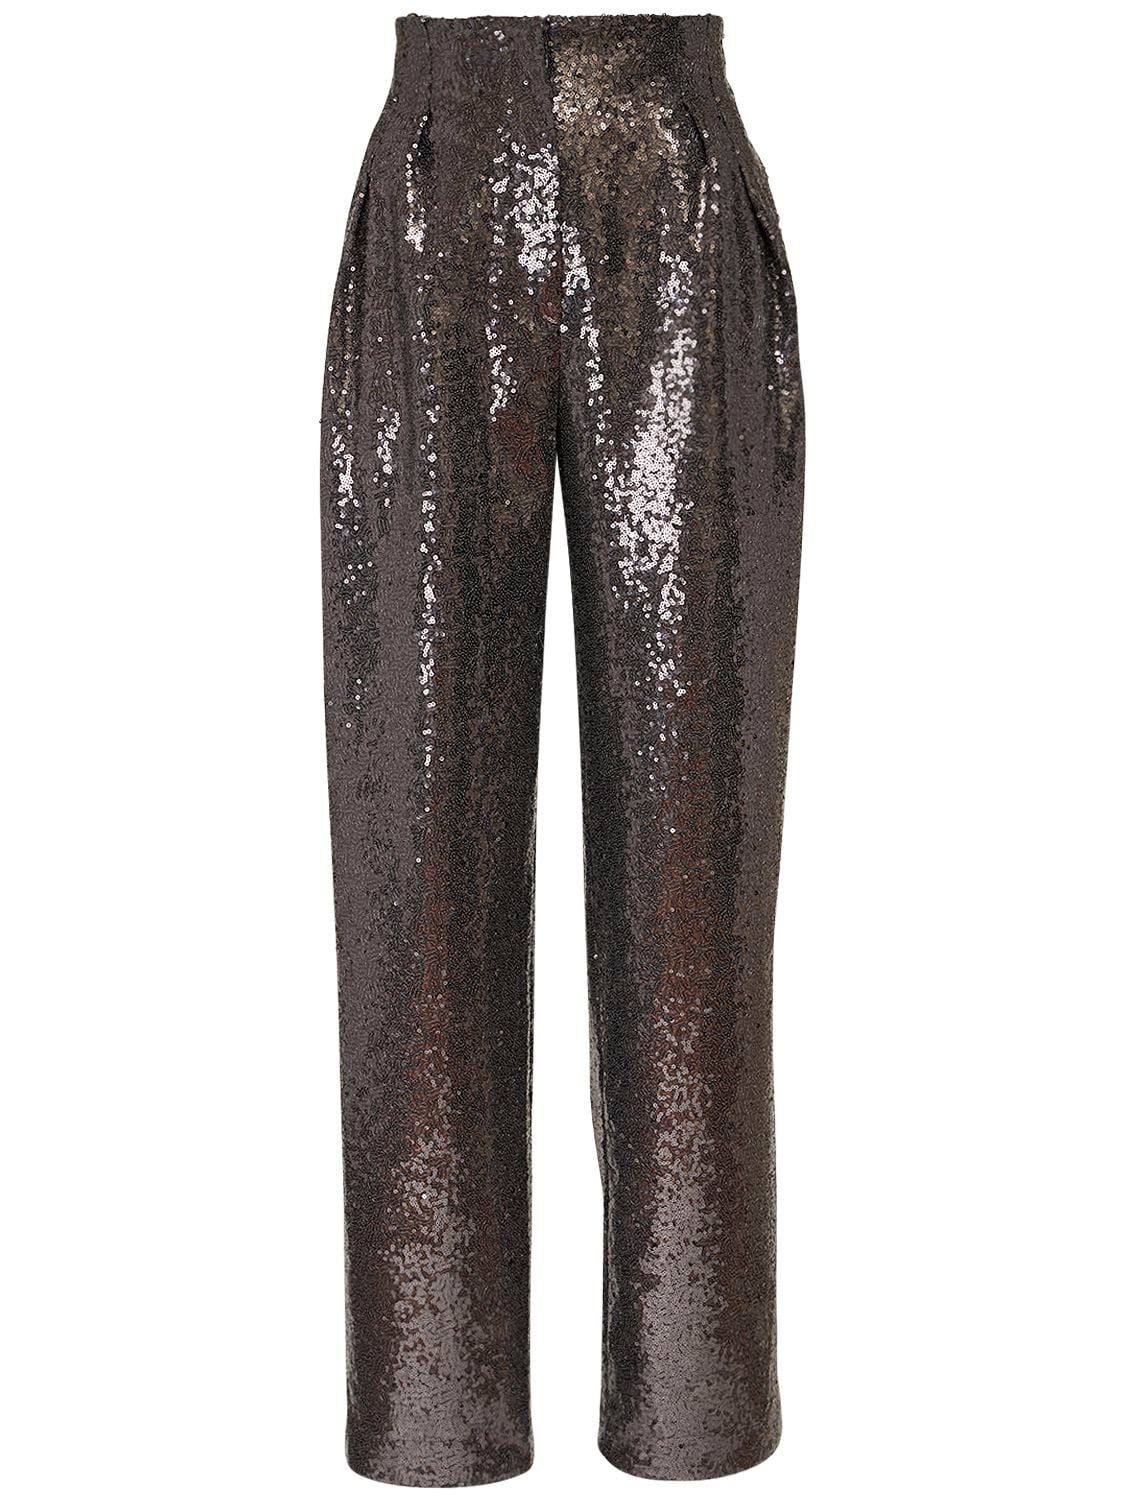 IN THE MOOD FOR LOVE CLYDE SEQUINED PANTS,72IXKL008-MDE3NQ2